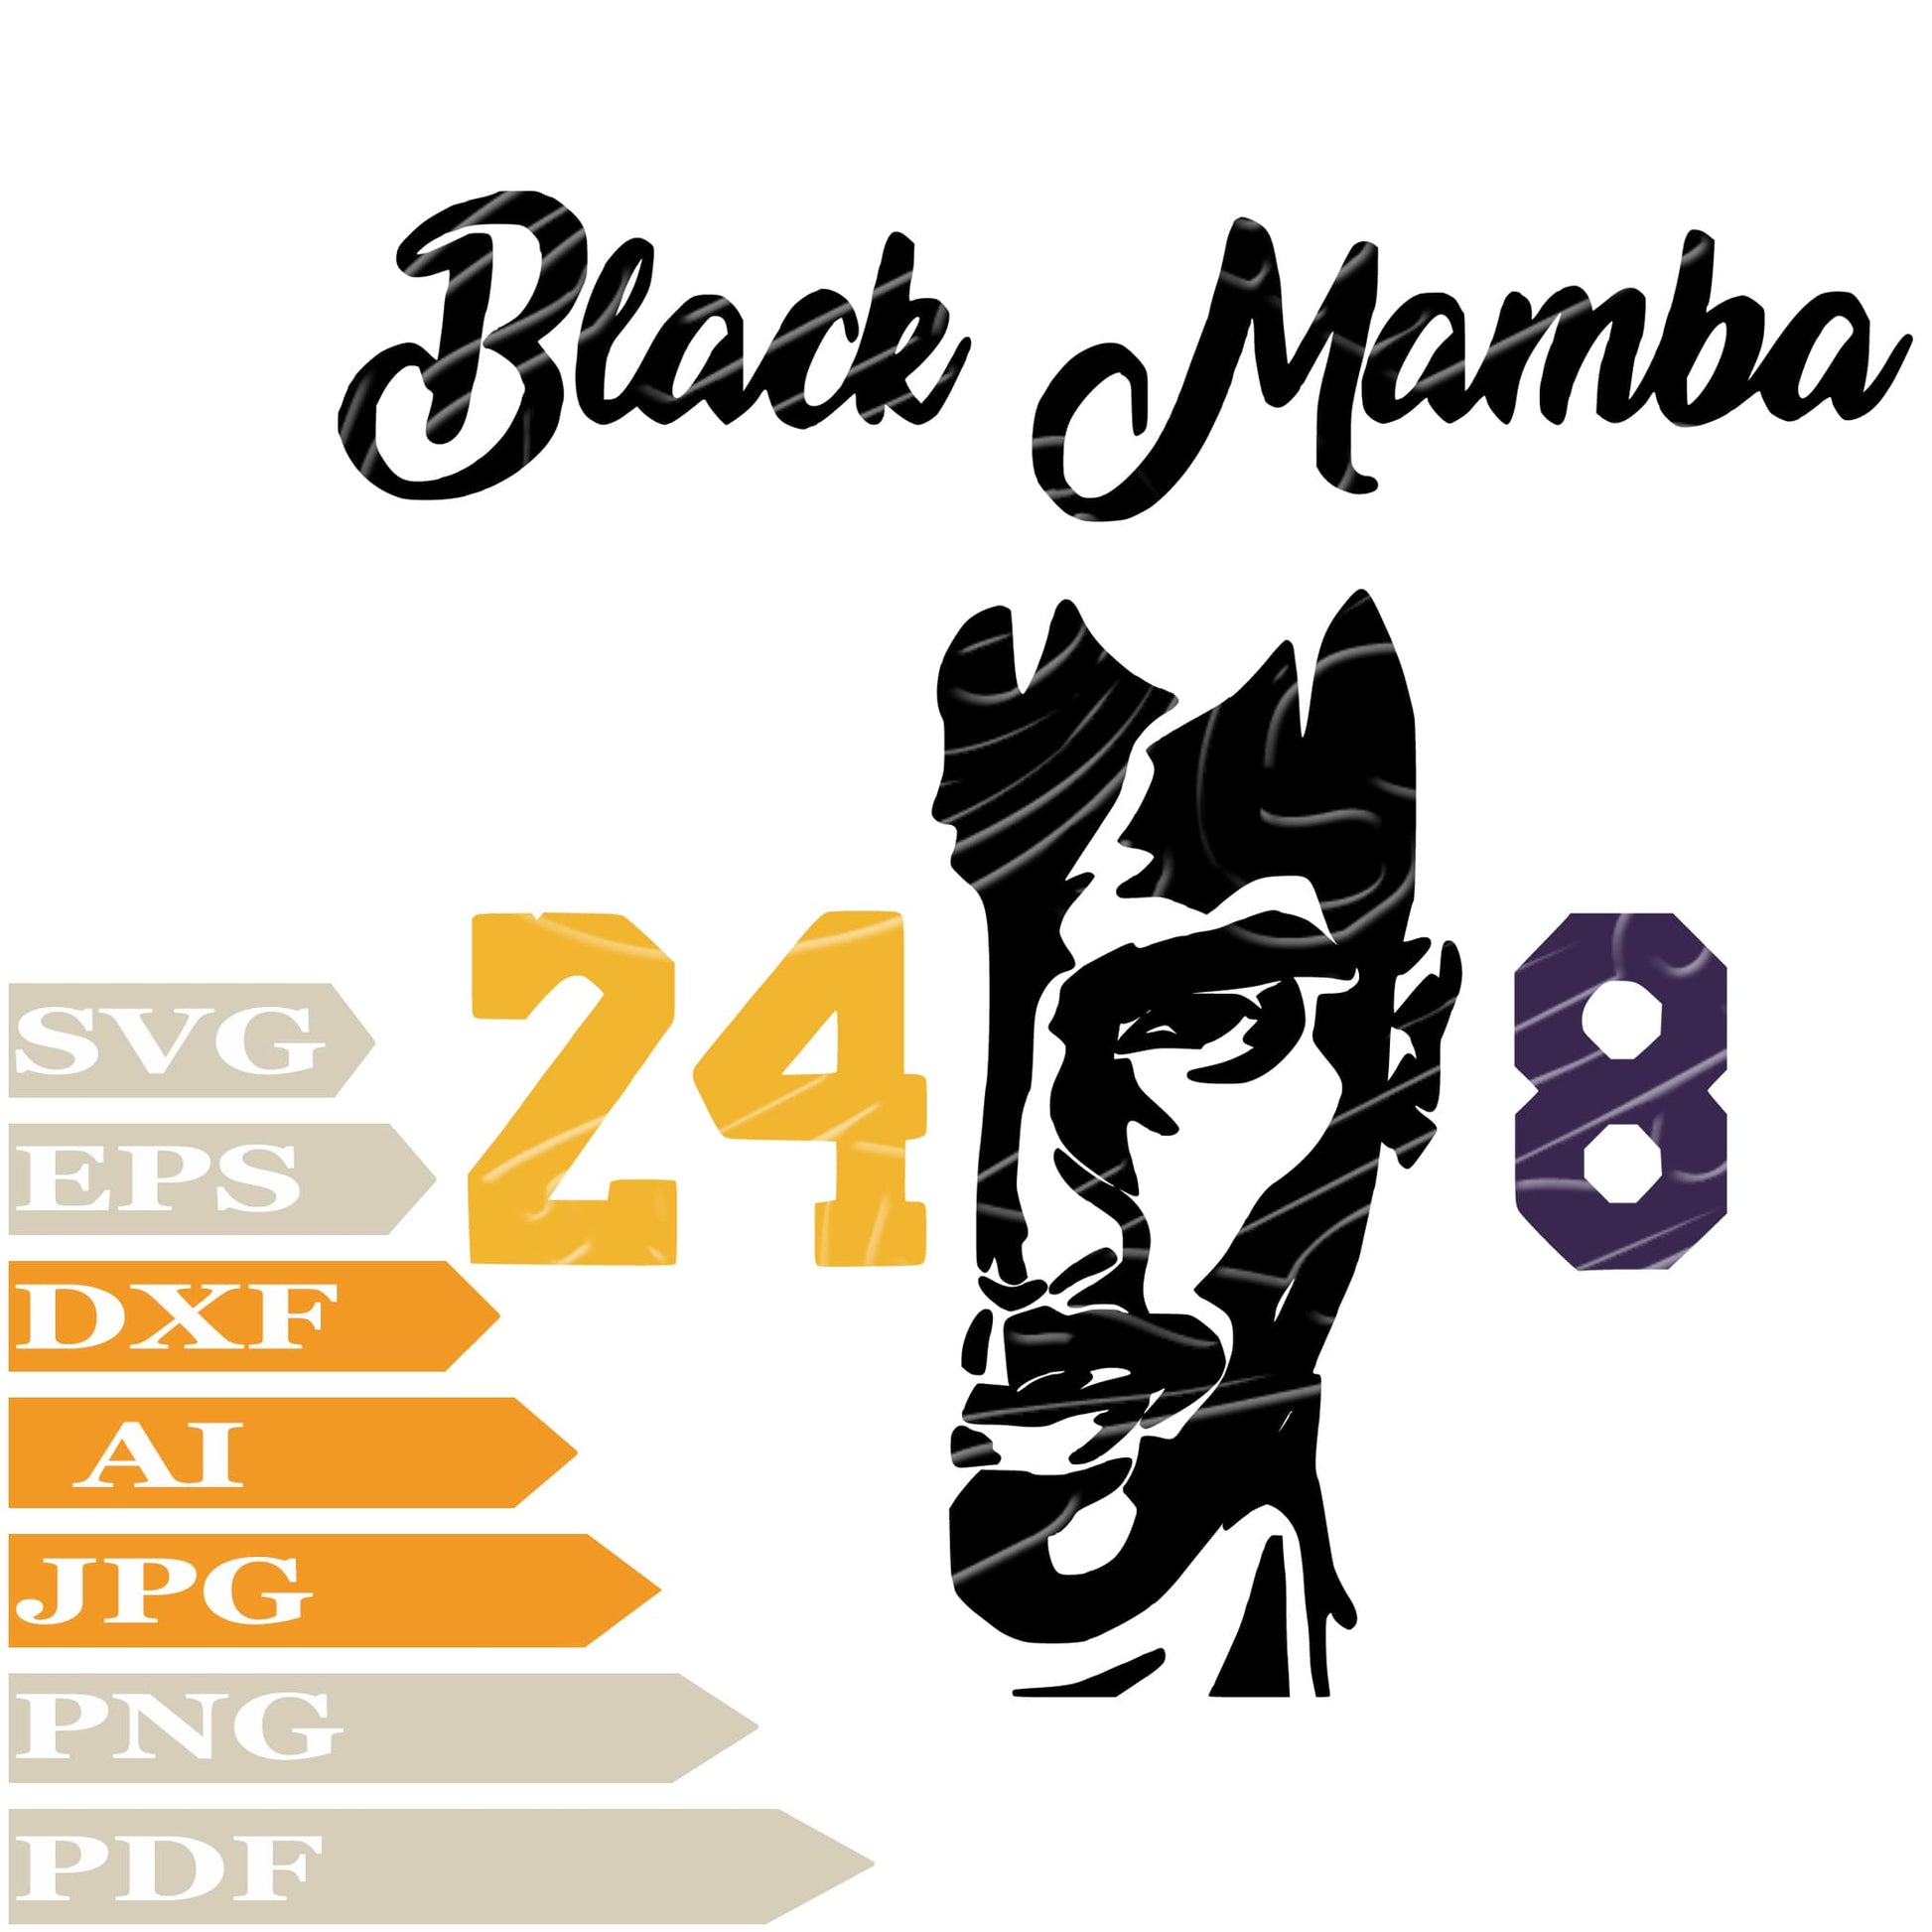 Kobe Bryant, Black Mamba Svg File, Image Cut, Png, For Tattoo, Silhouette, Digital Vector Download, Cut File, Clipart, For Cricut